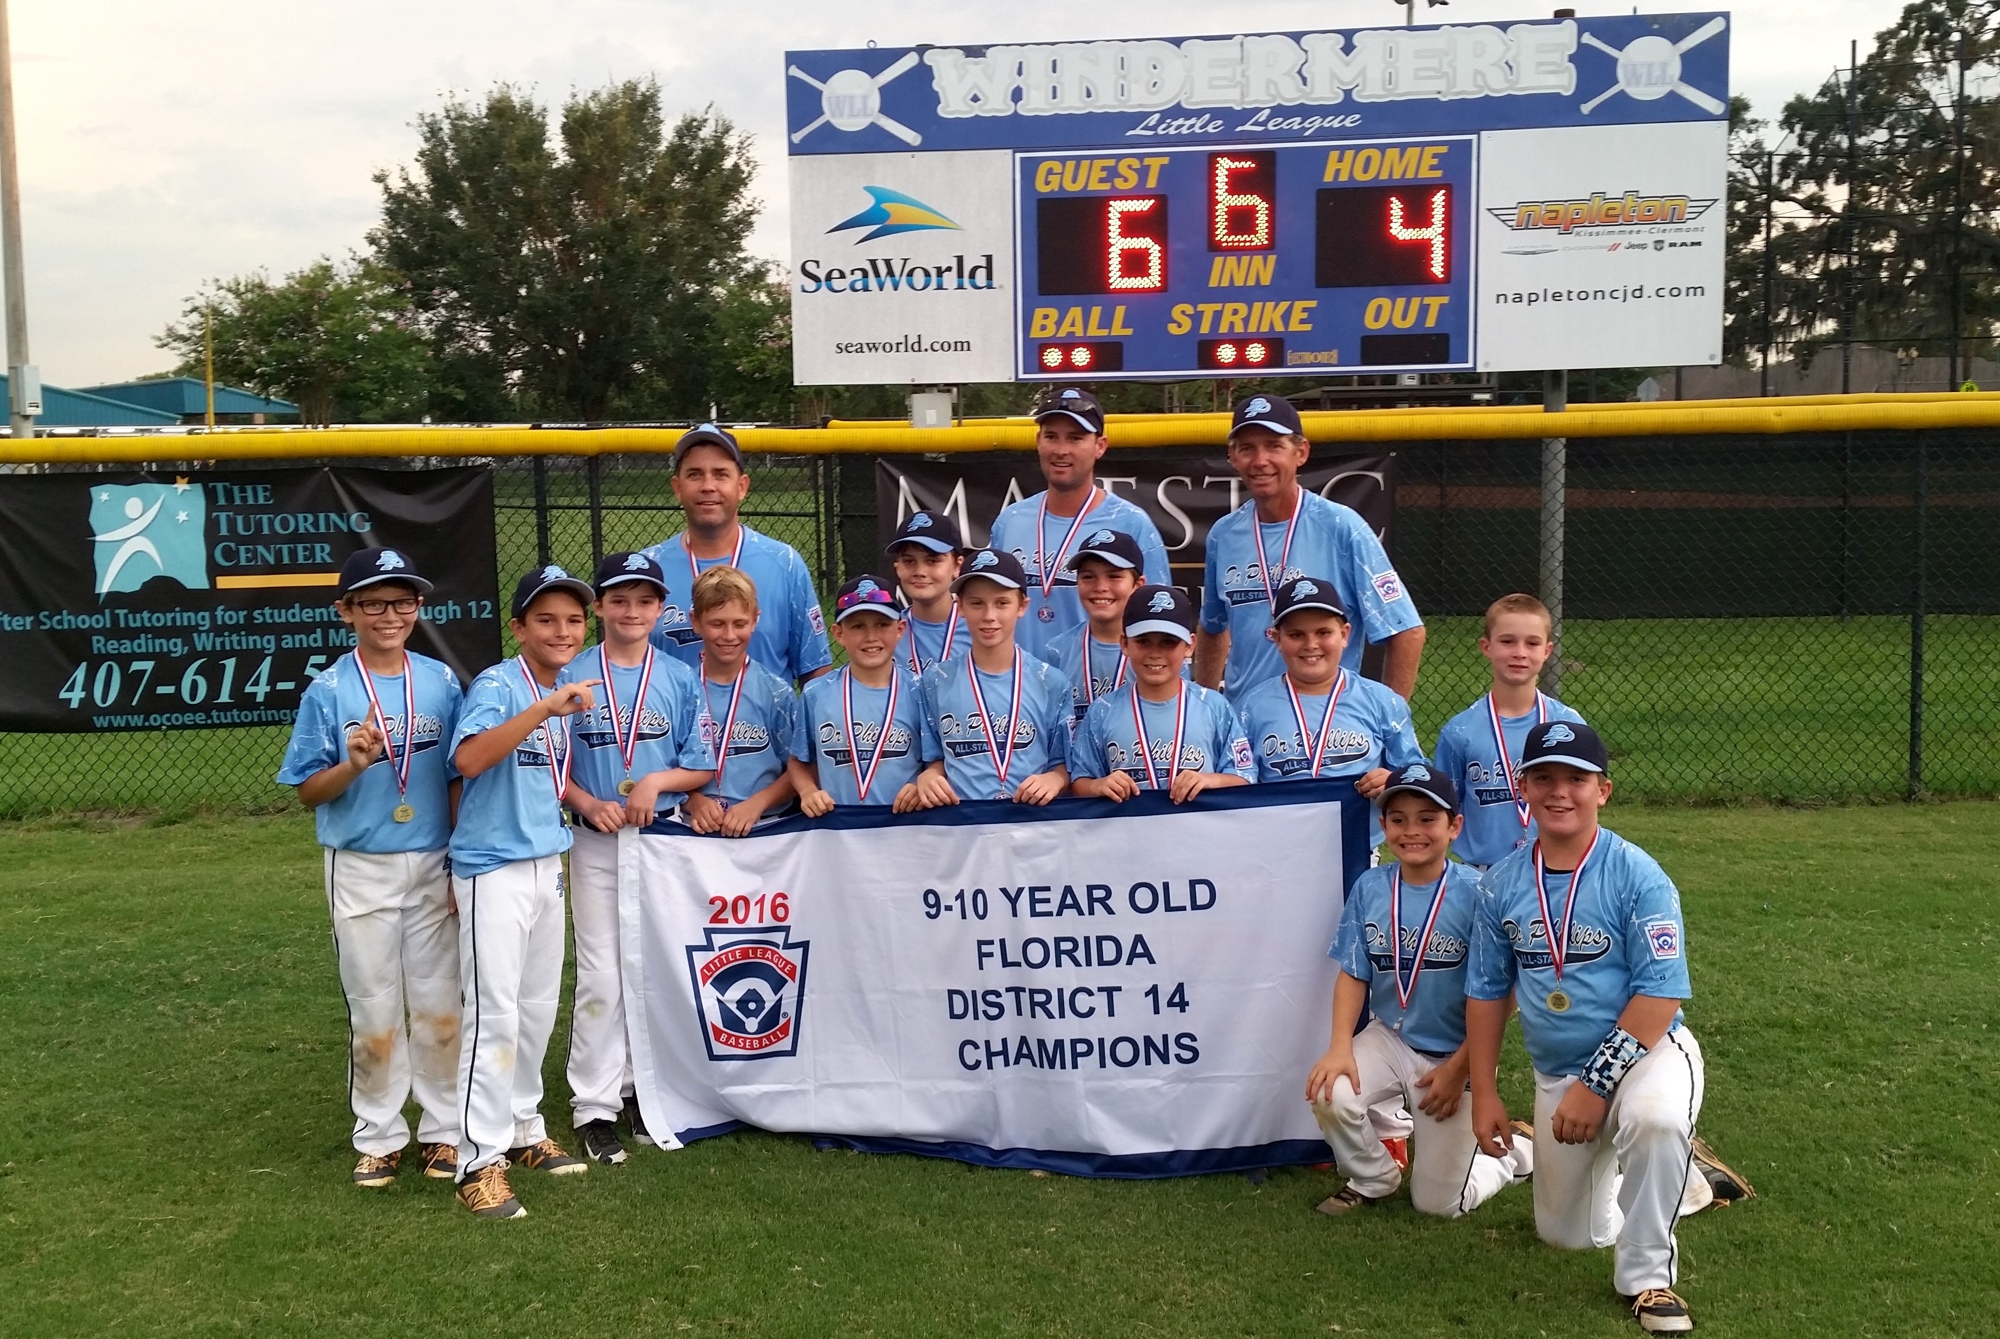 The Dr. Phillips Little League Minors (10U) All-Stars show off their district championship banner.